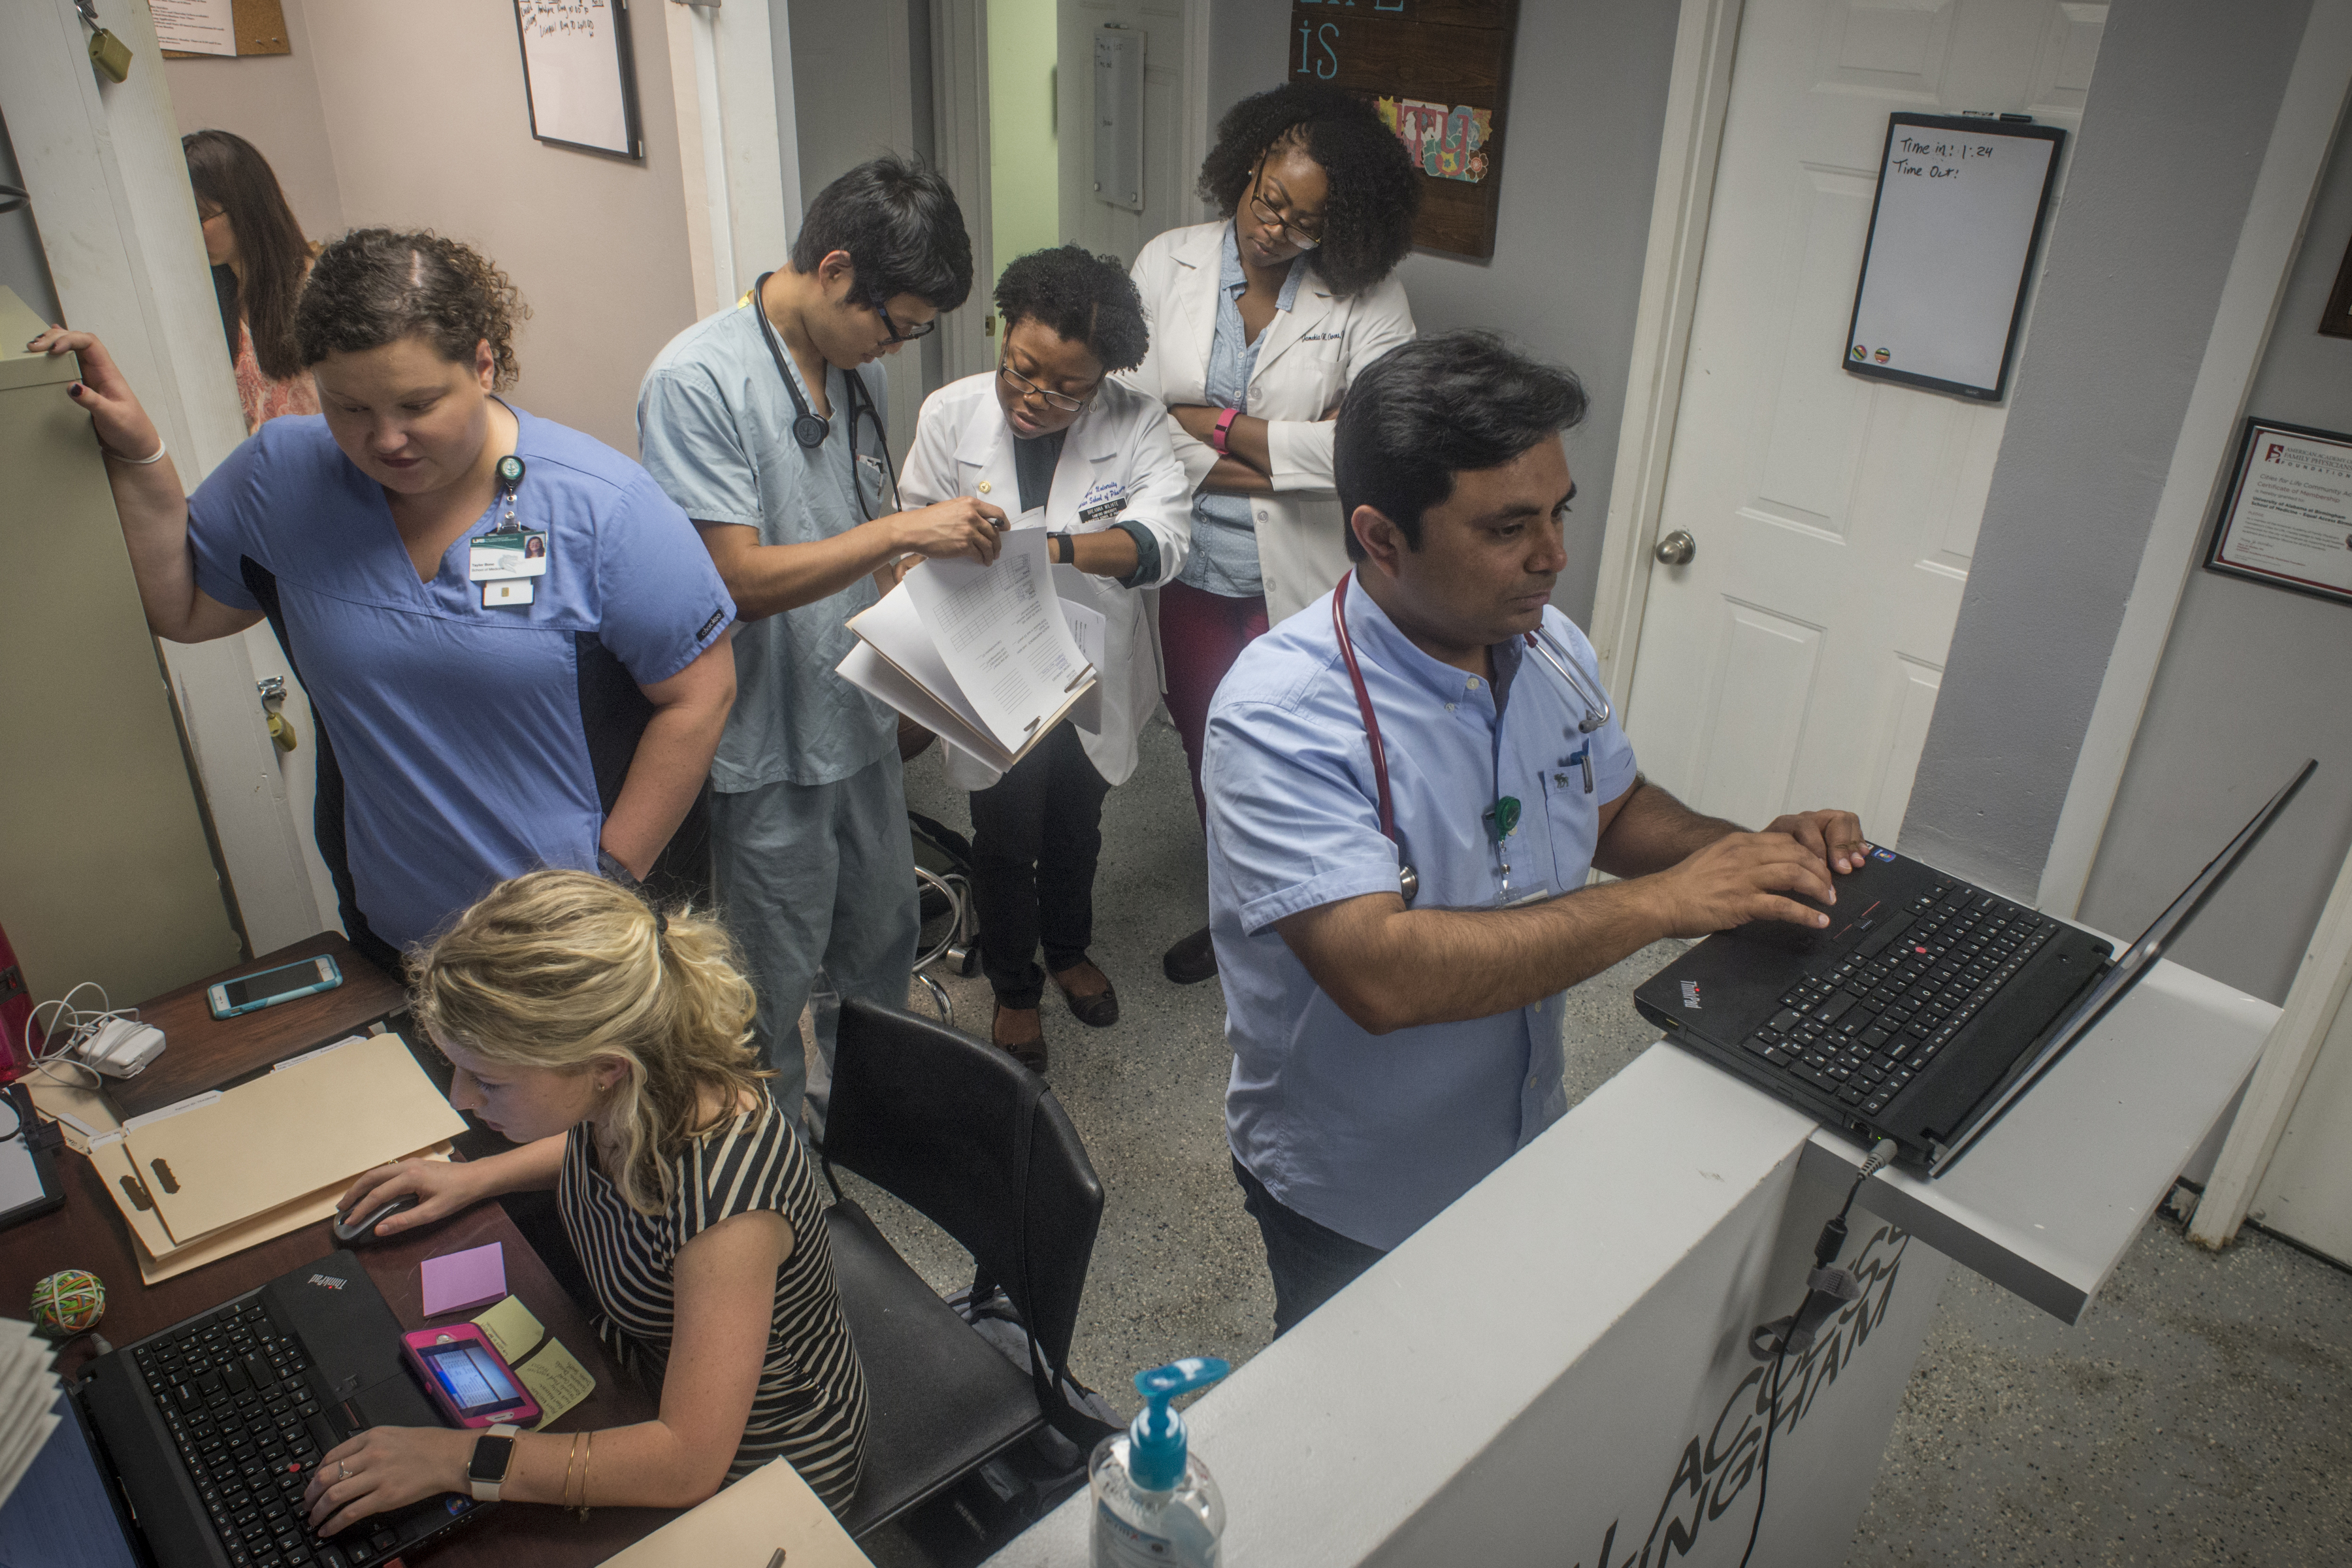 Dr. Gaurav Parmar does paper work in between helping UAB medical students at the Equal Access Birmingham clinic as they take medical histories before he sees the patients. (Walt Stricklin, special to The Times)